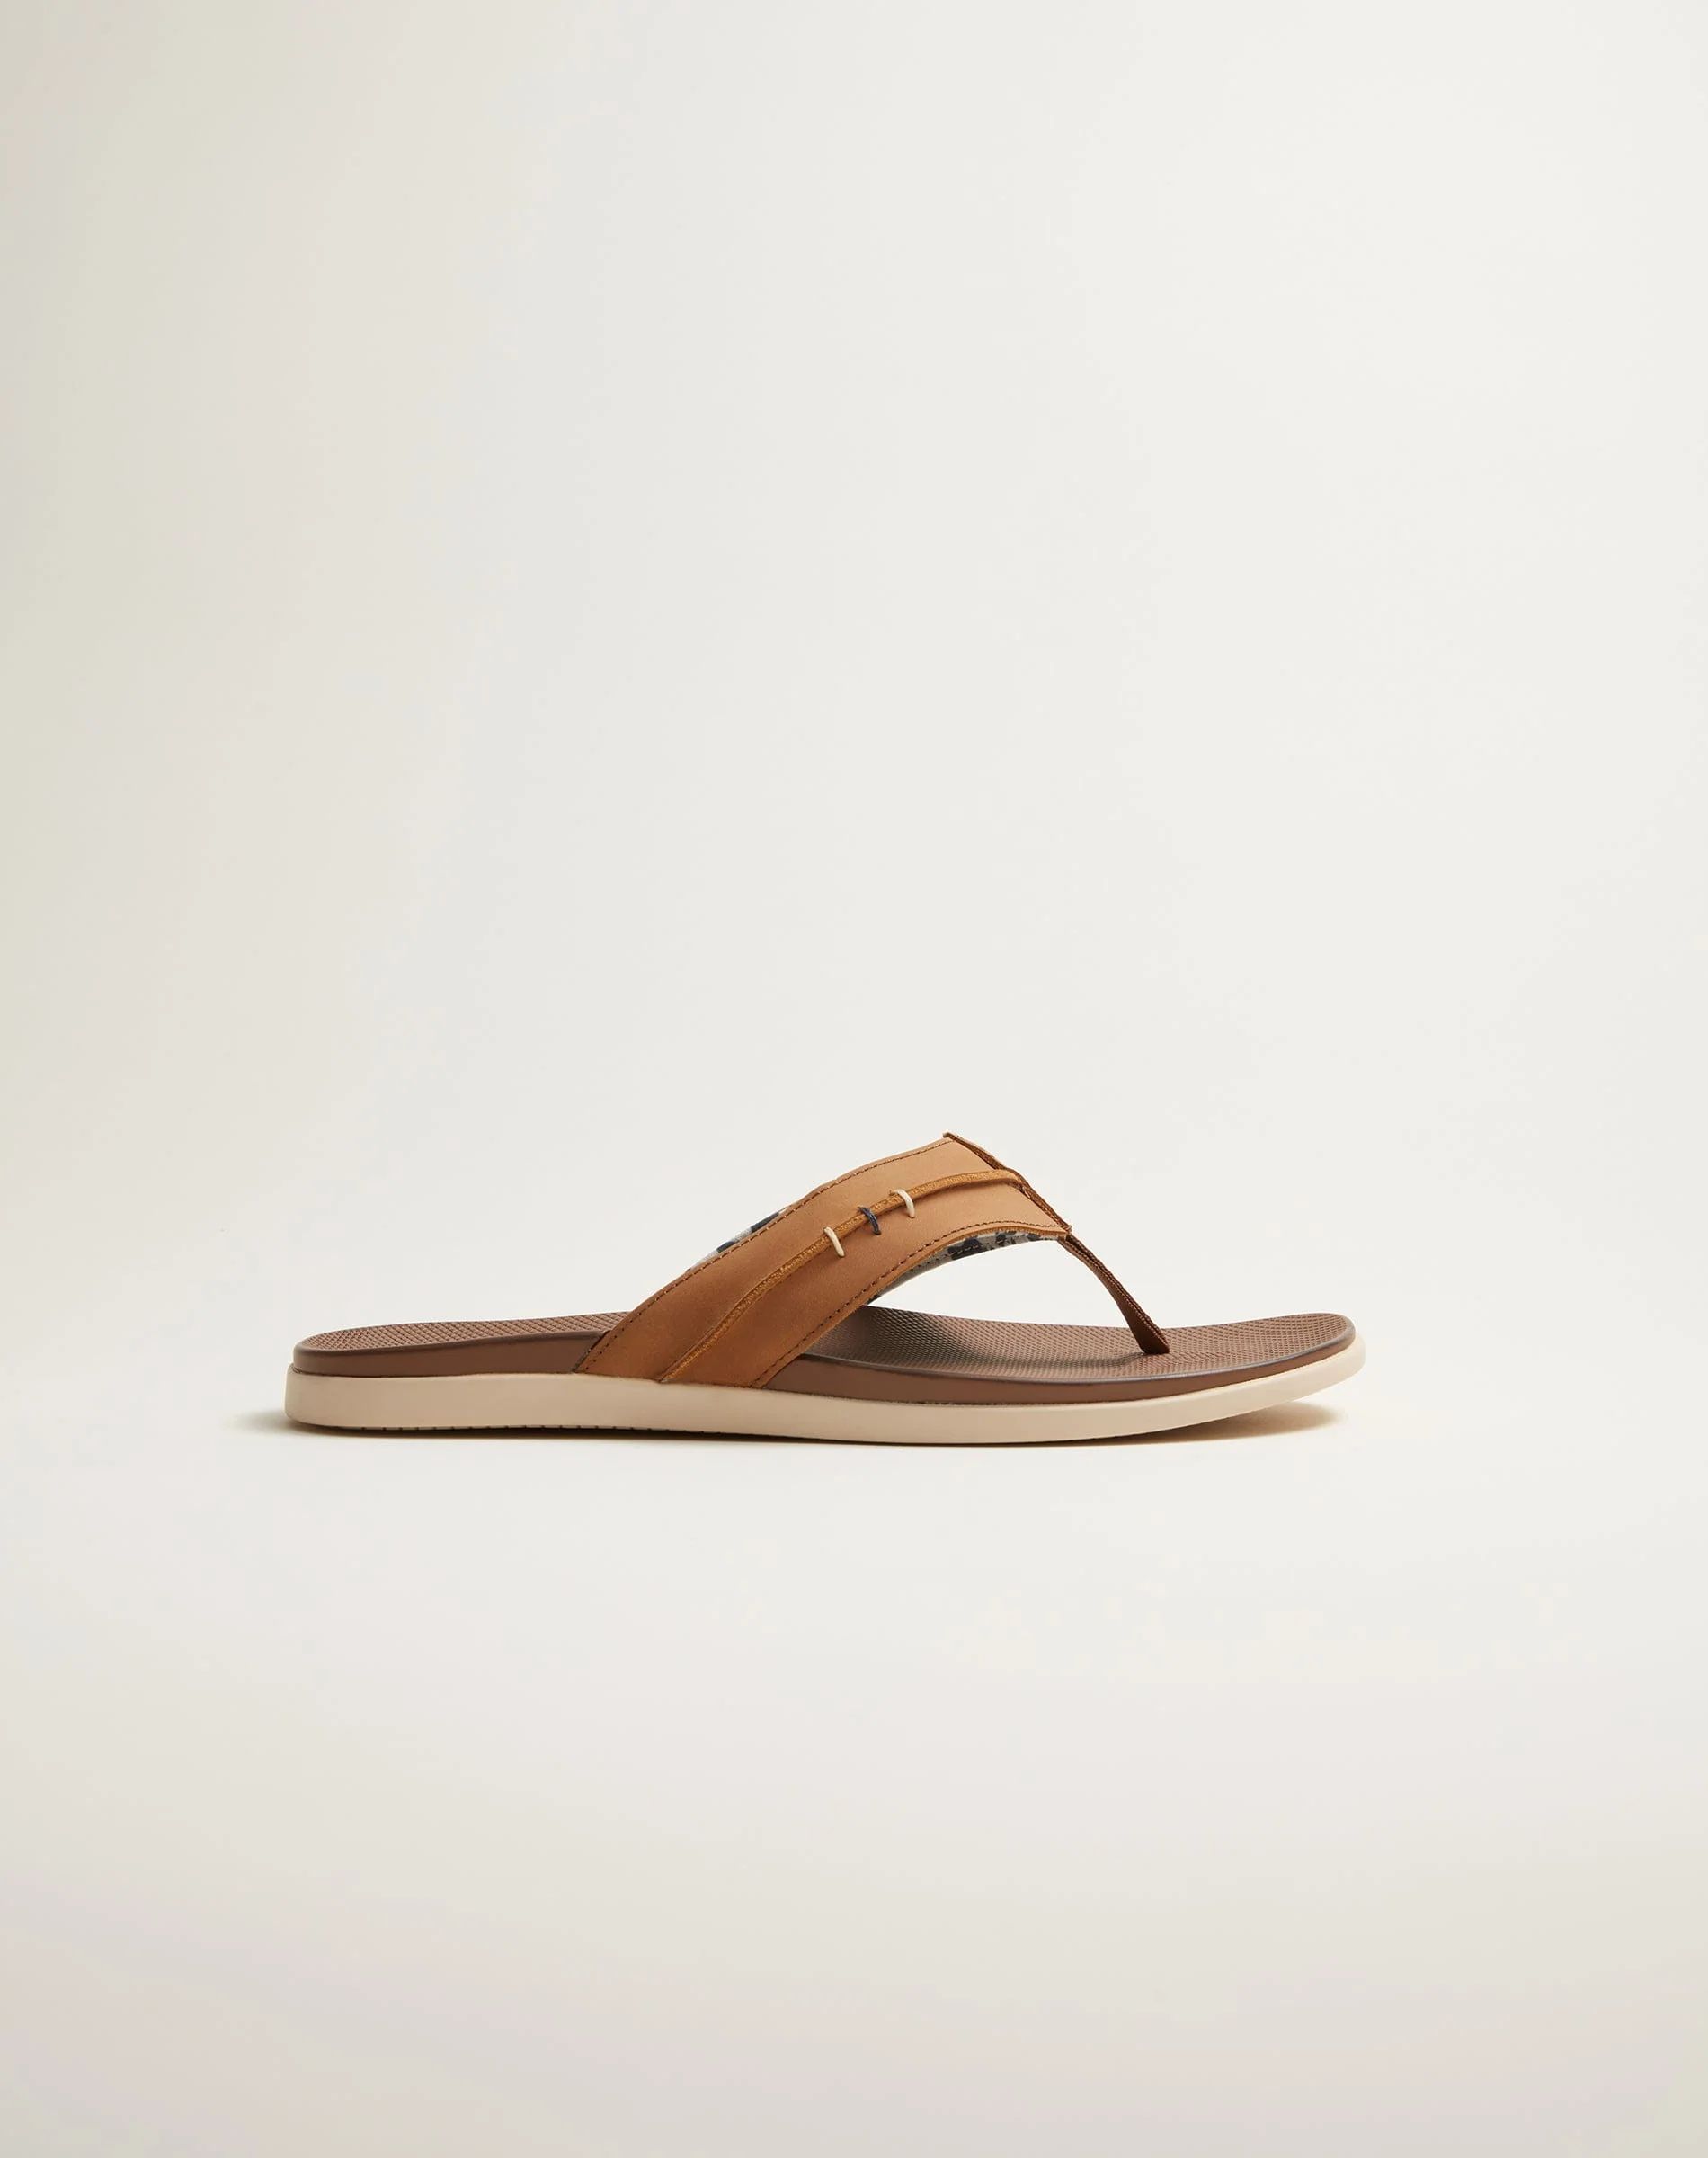 Starboard Leather Sandal | johnnie O